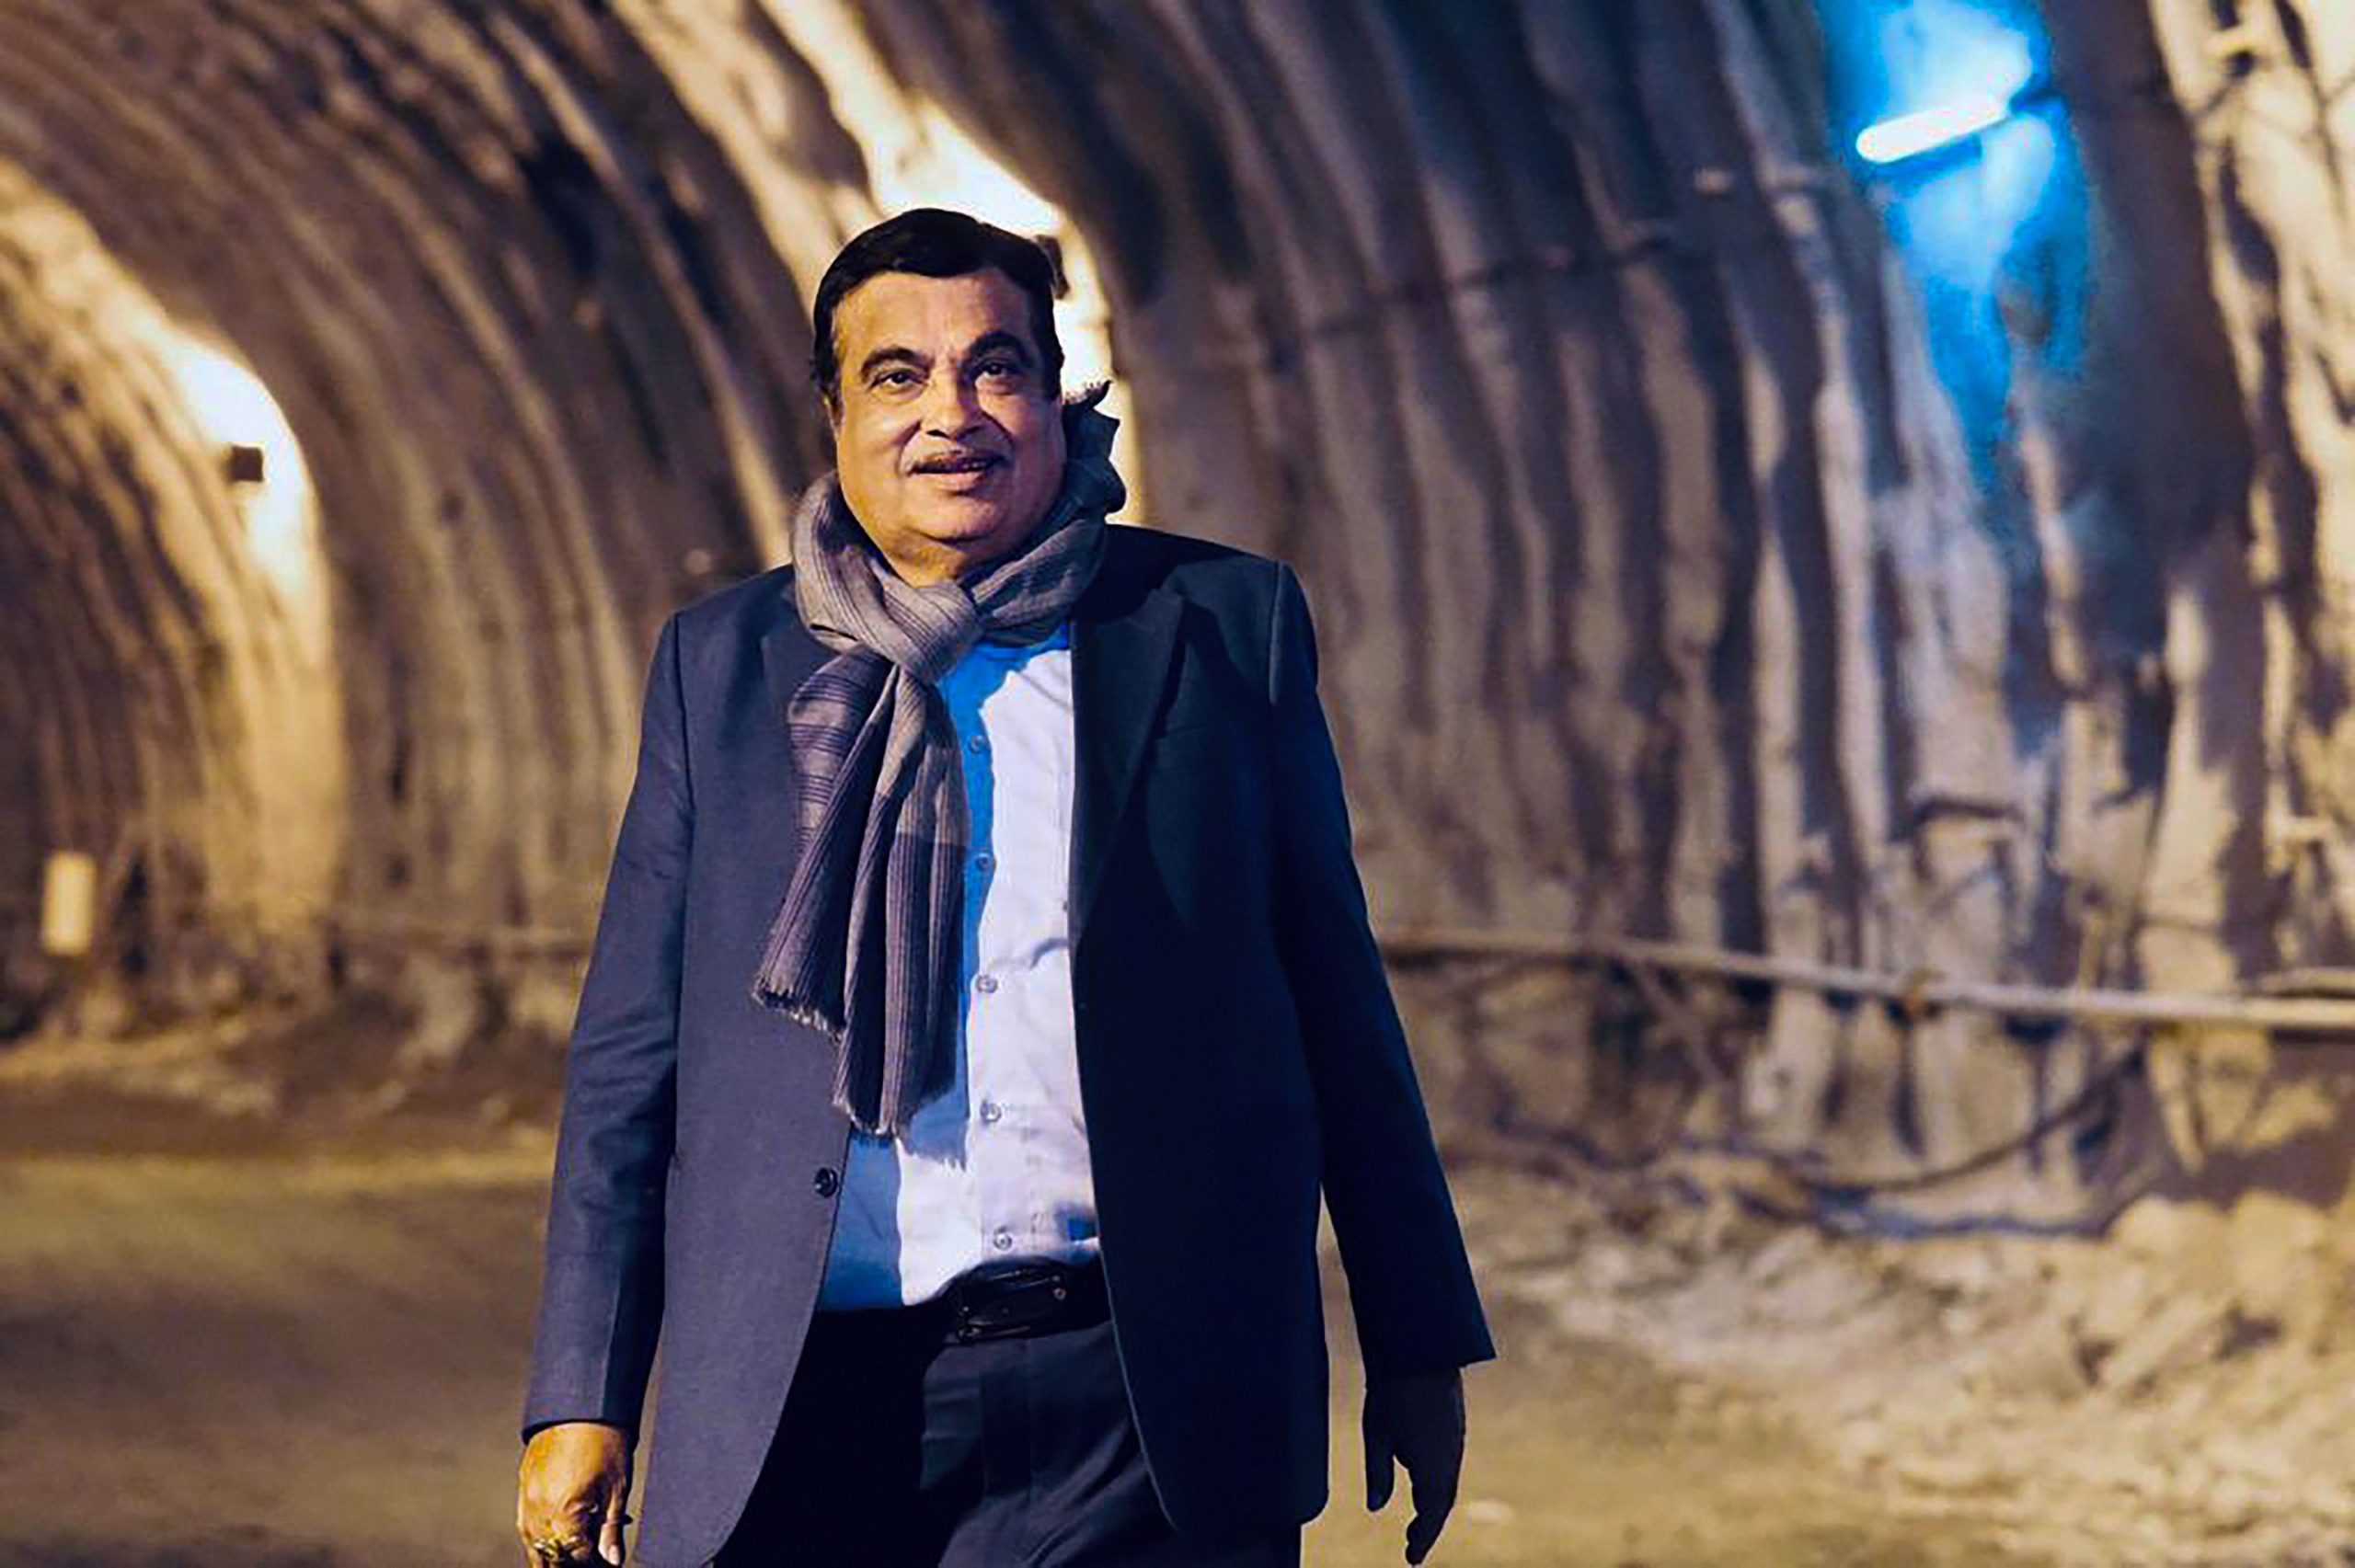 Sonmarg-Drass connecting Zojila Tunnel expected to be ready by 2024